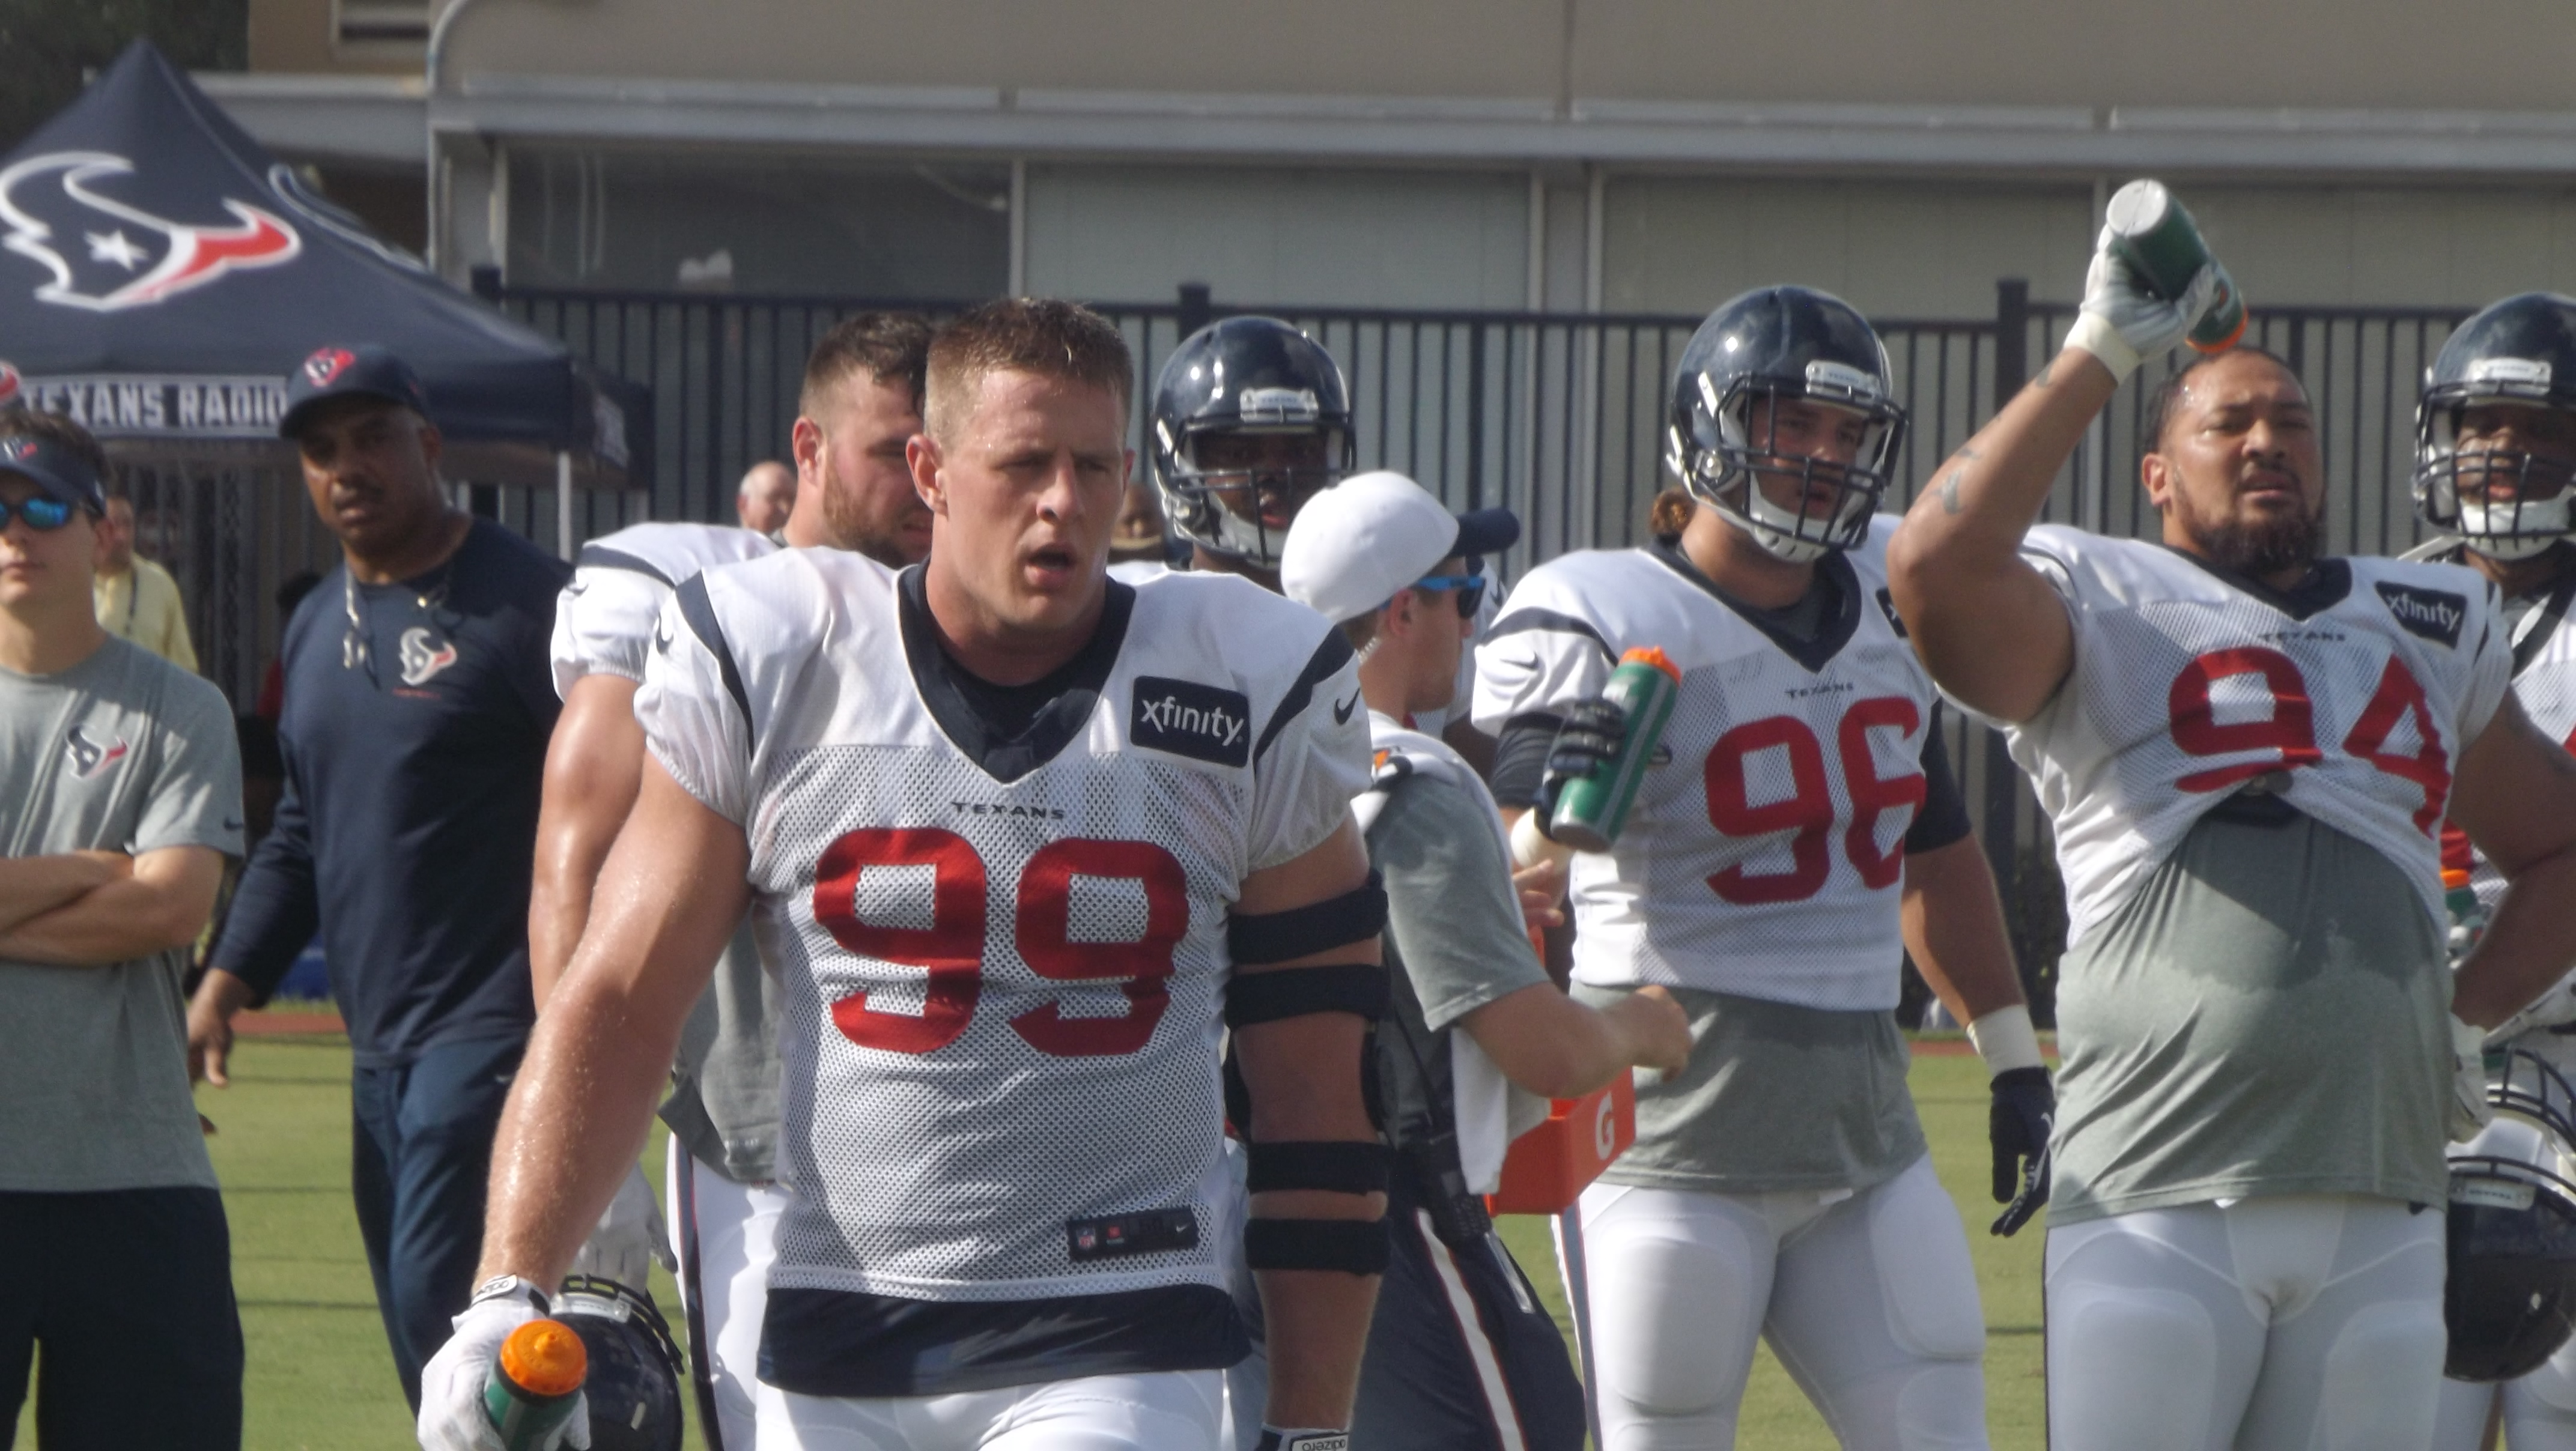 J.J. Watt is sure to bring some entertainment and joy to your hearts and television screen.